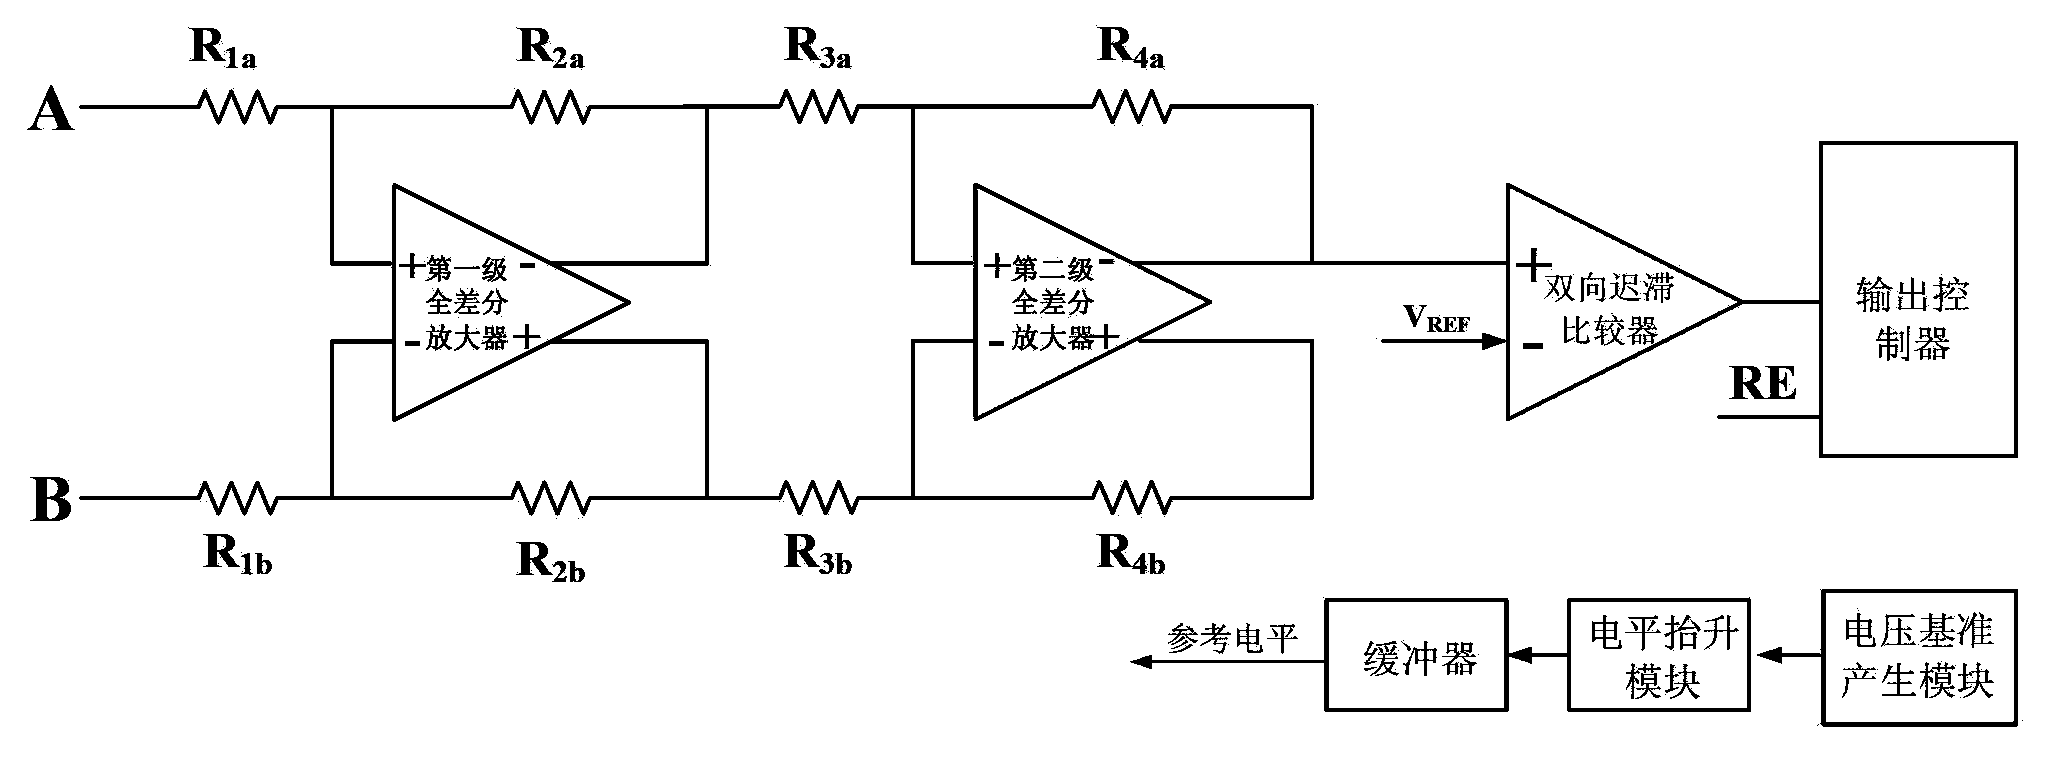 Receiving circuit of RS-485 receiver